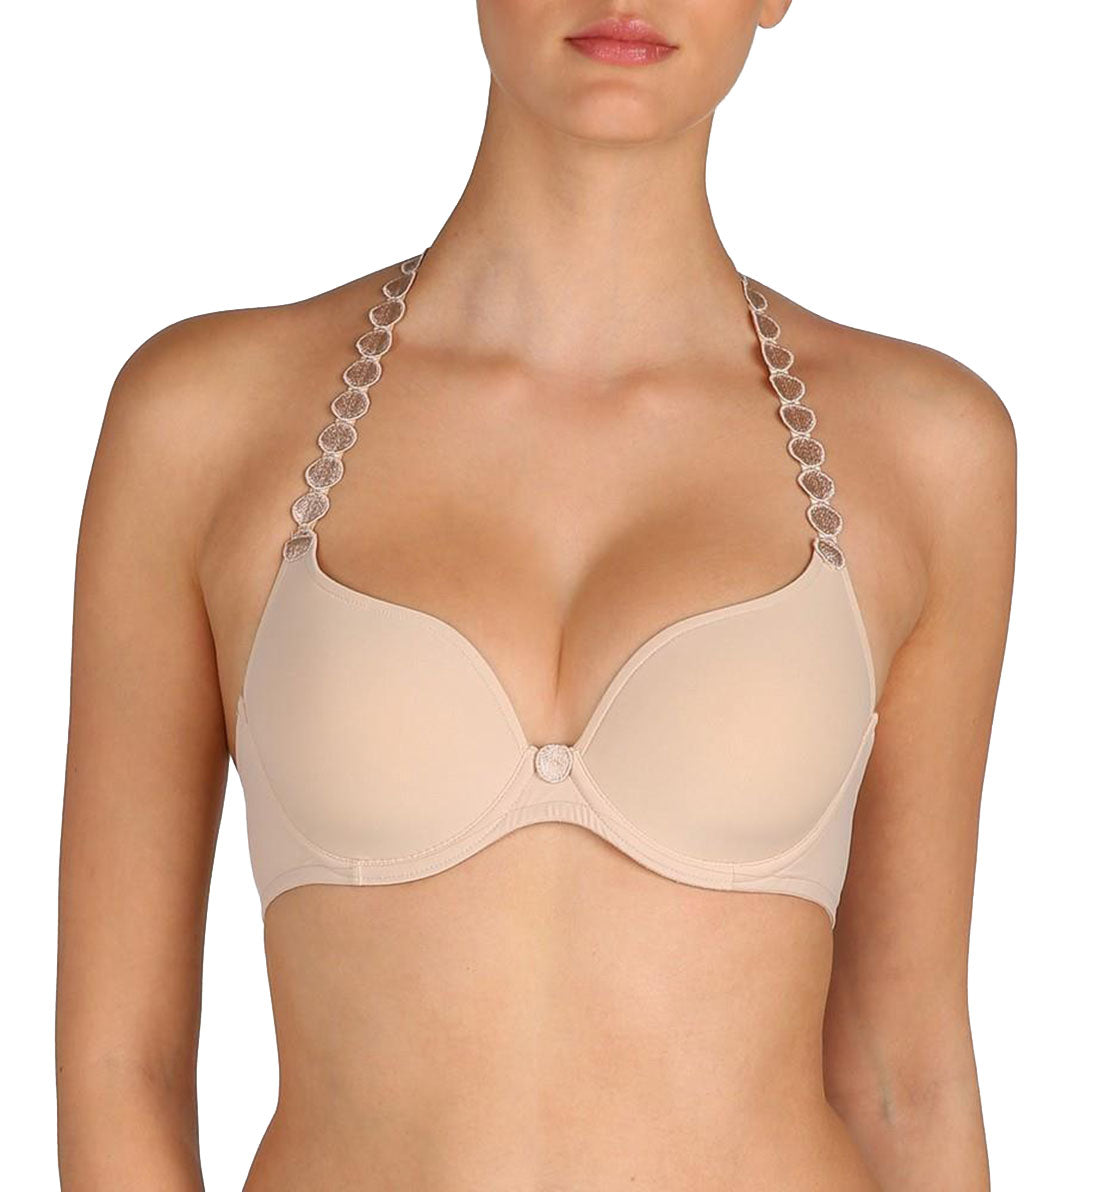 Cosabella Never Say Never Pushie Push Up Bra (NEVER1137),28C,Sette 